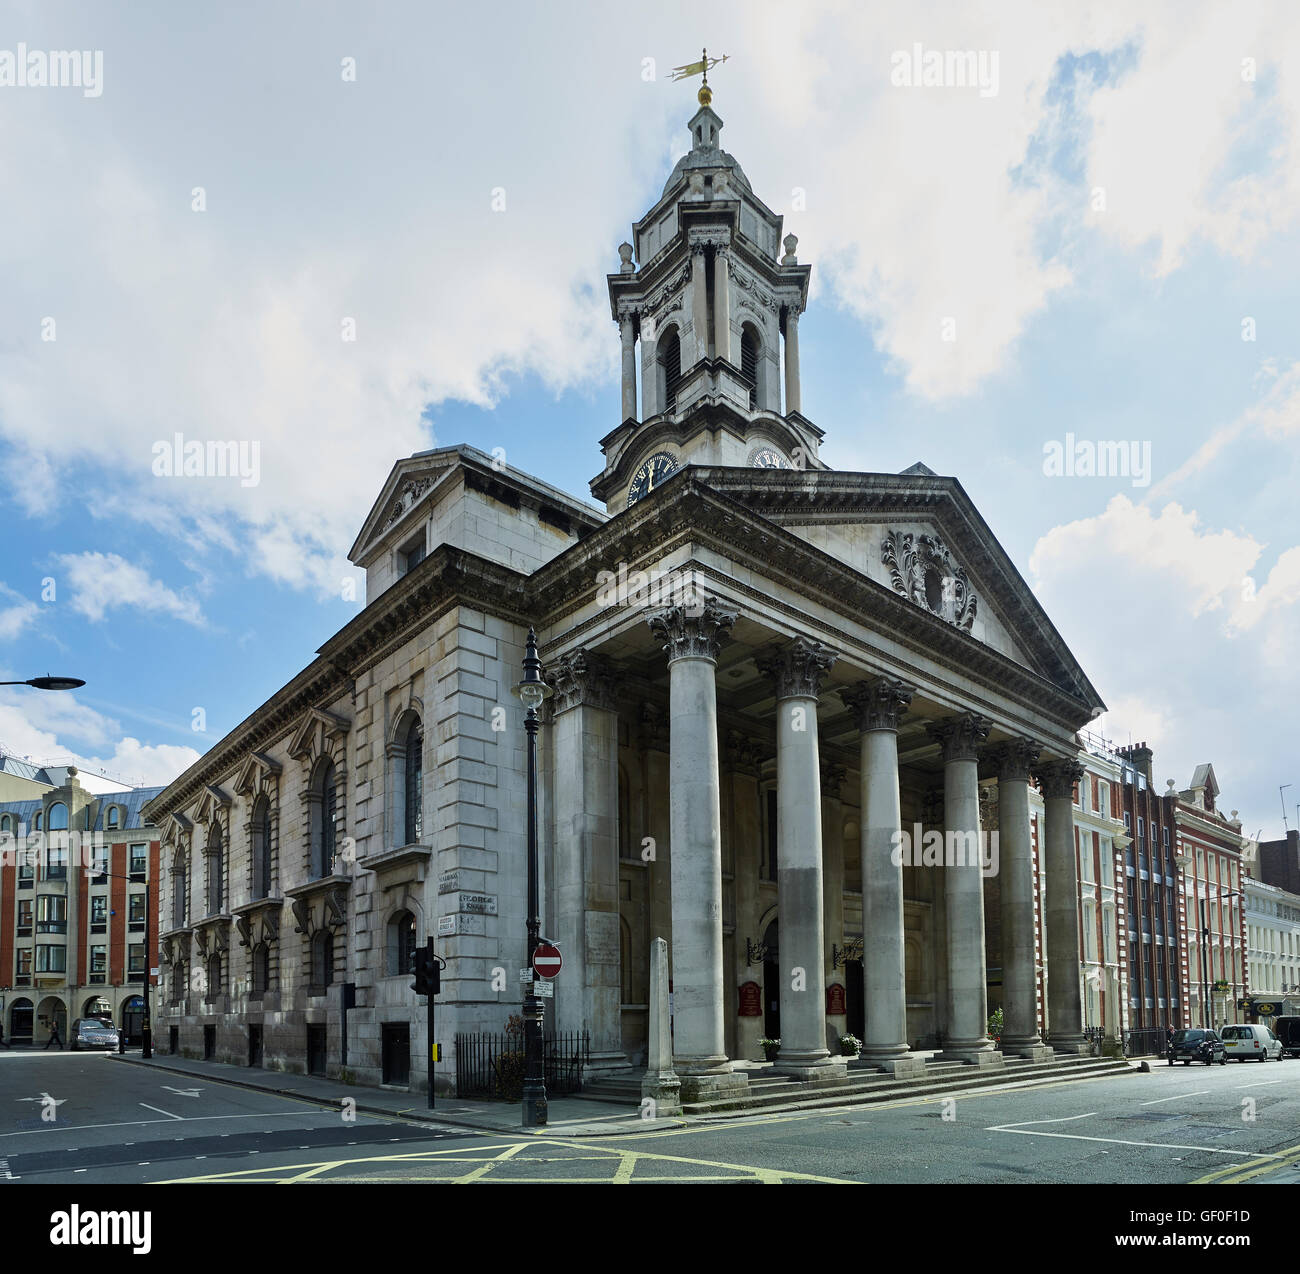 St George's Hanover Square. Portico and tower; built by John James between 1721 and 1725. Stock Photo